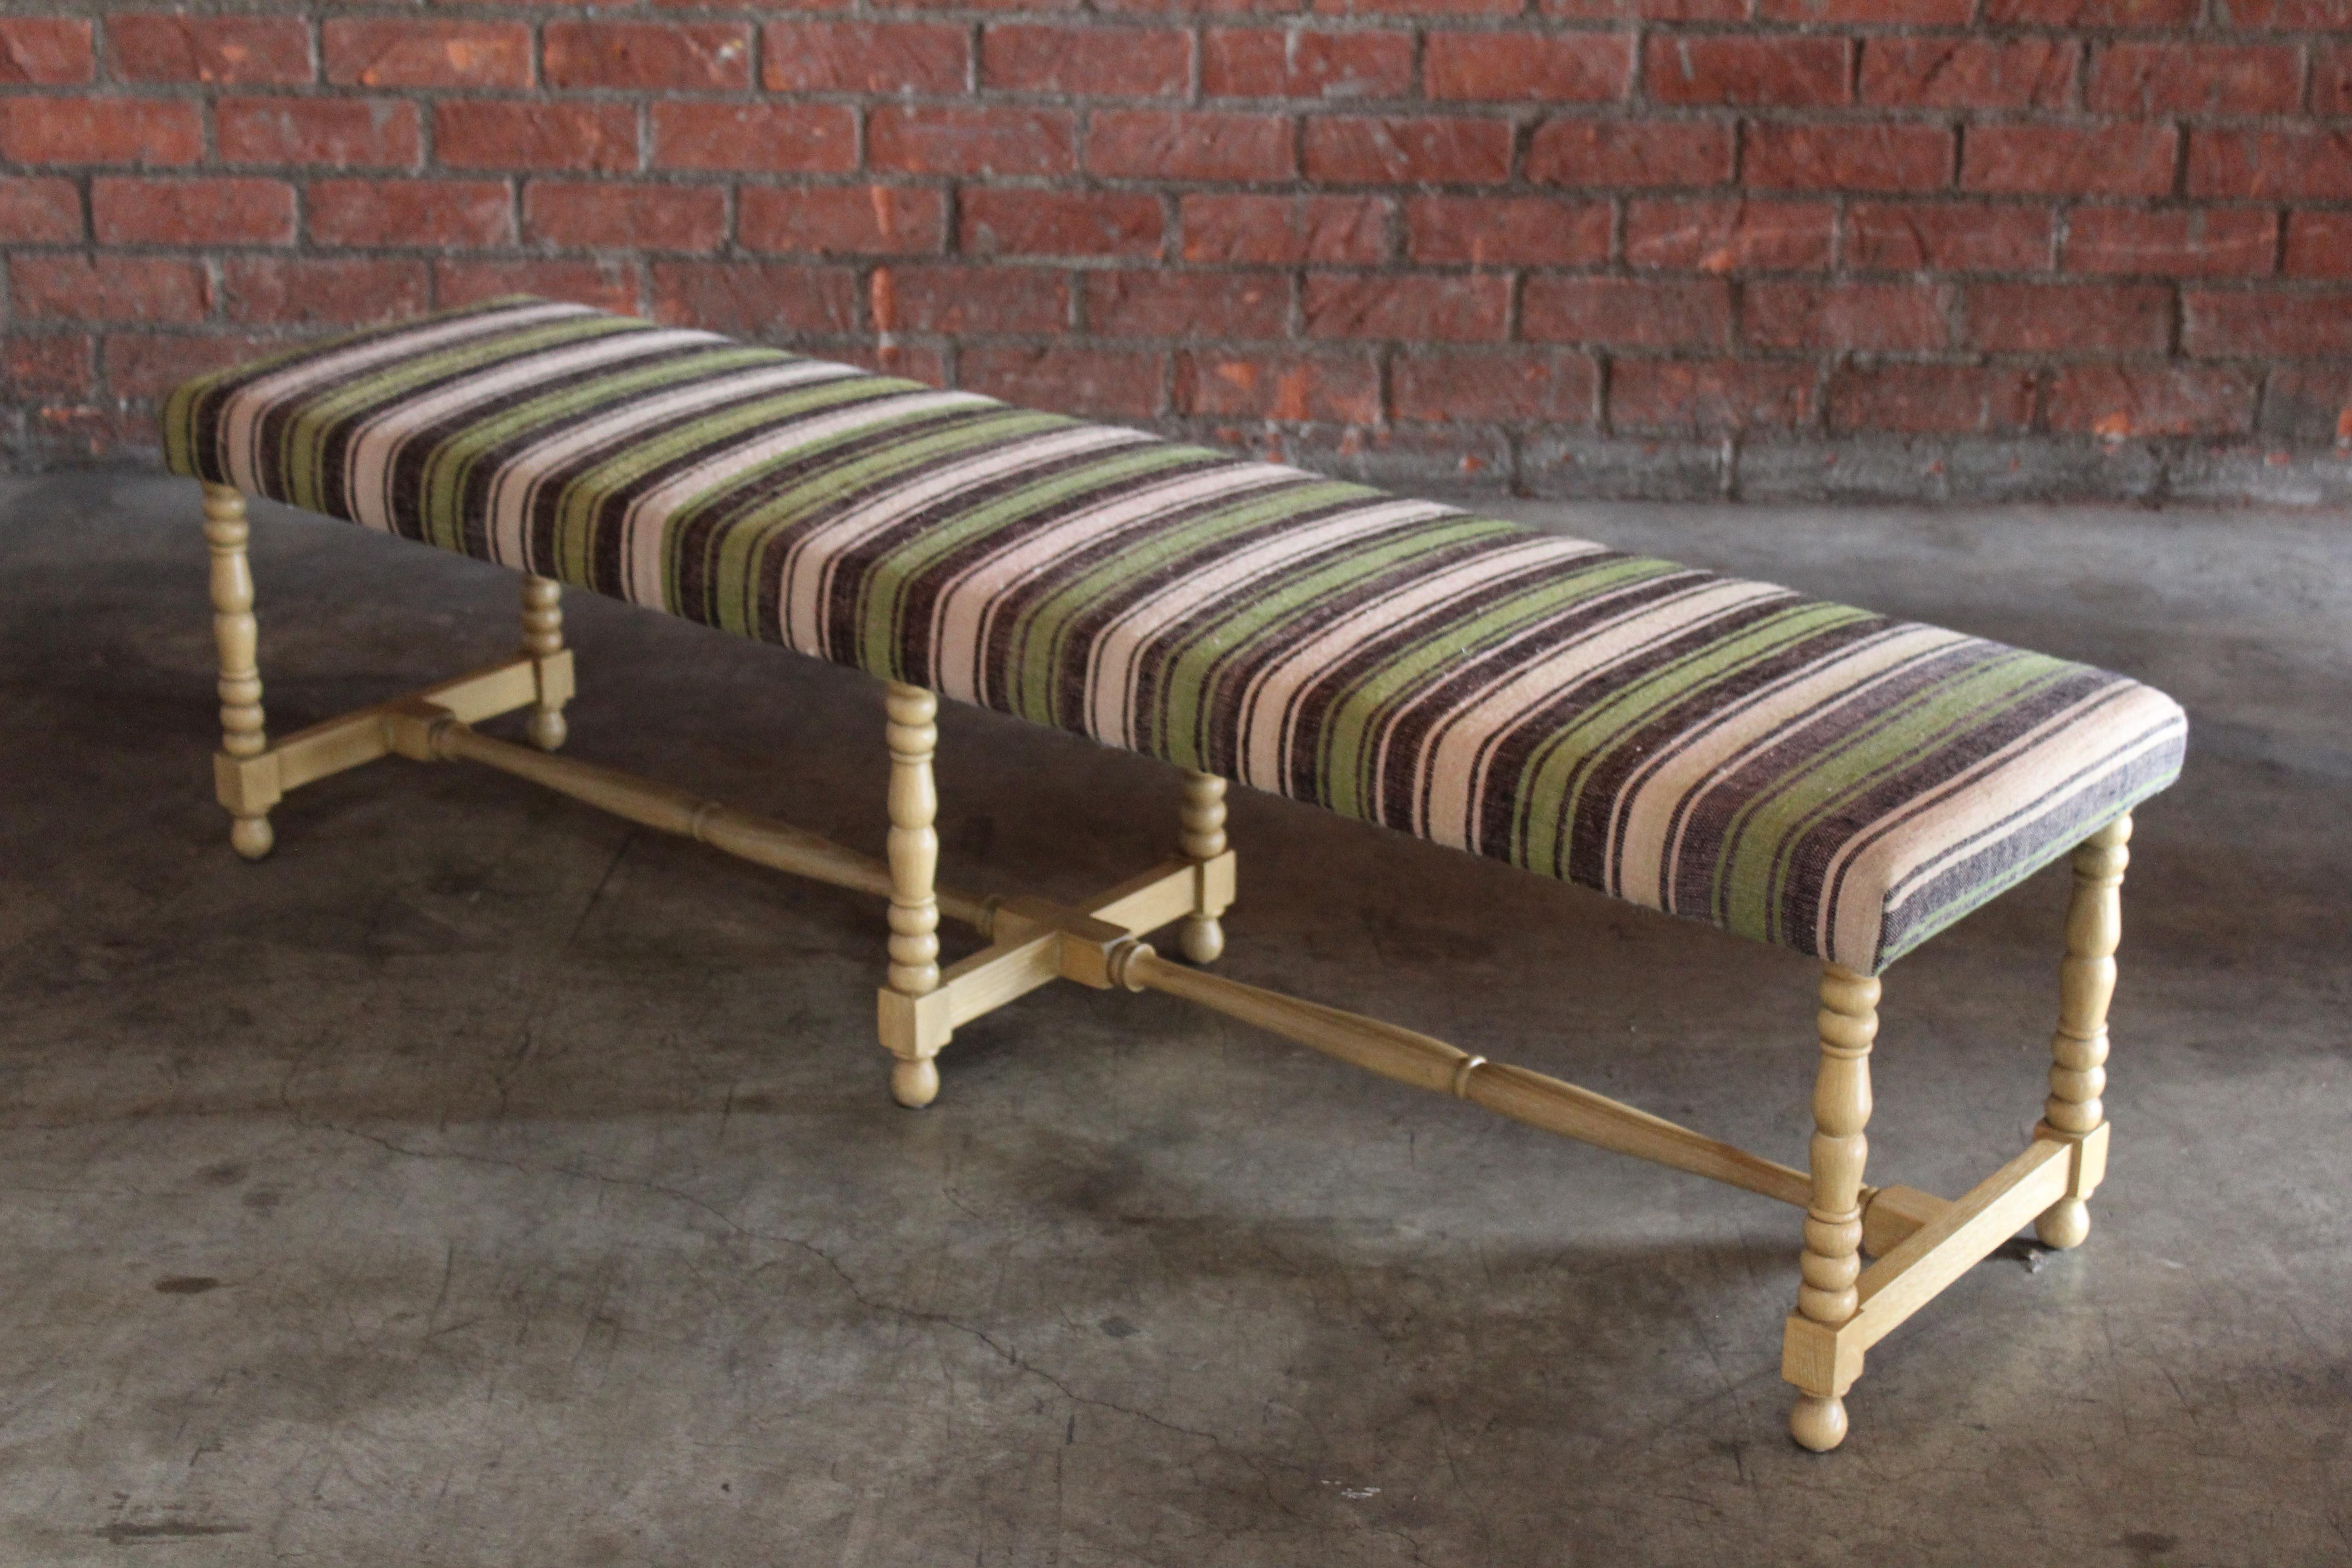 Contemporary Oak Bench Upholstered in a Vintage Turkish Kilim